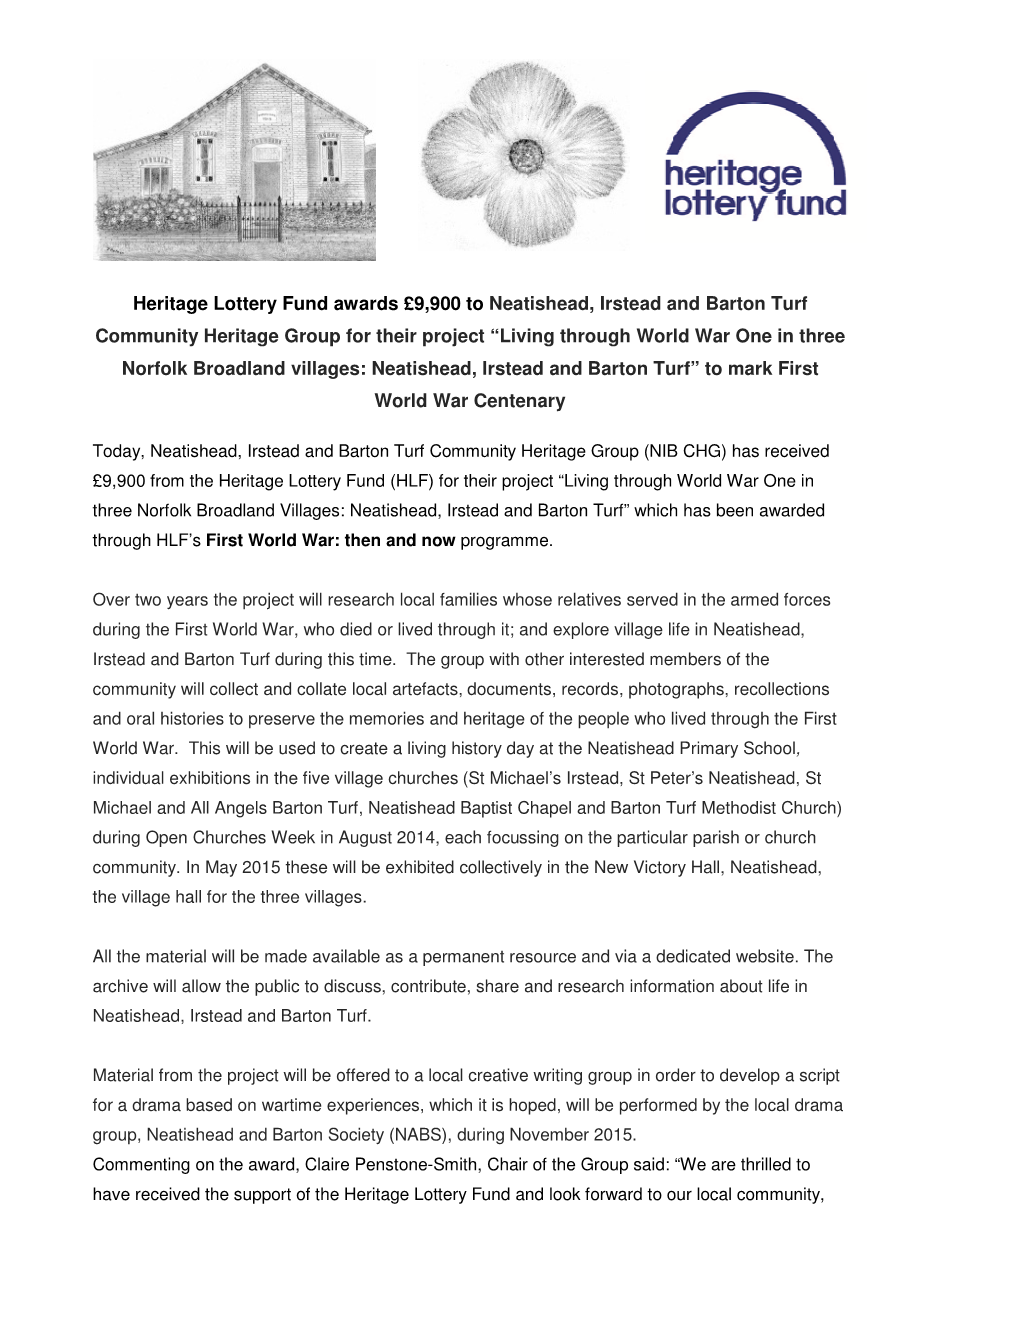 Heritage Lottery Fund Awards £9,900 to Neatishead, Irstead and Barton